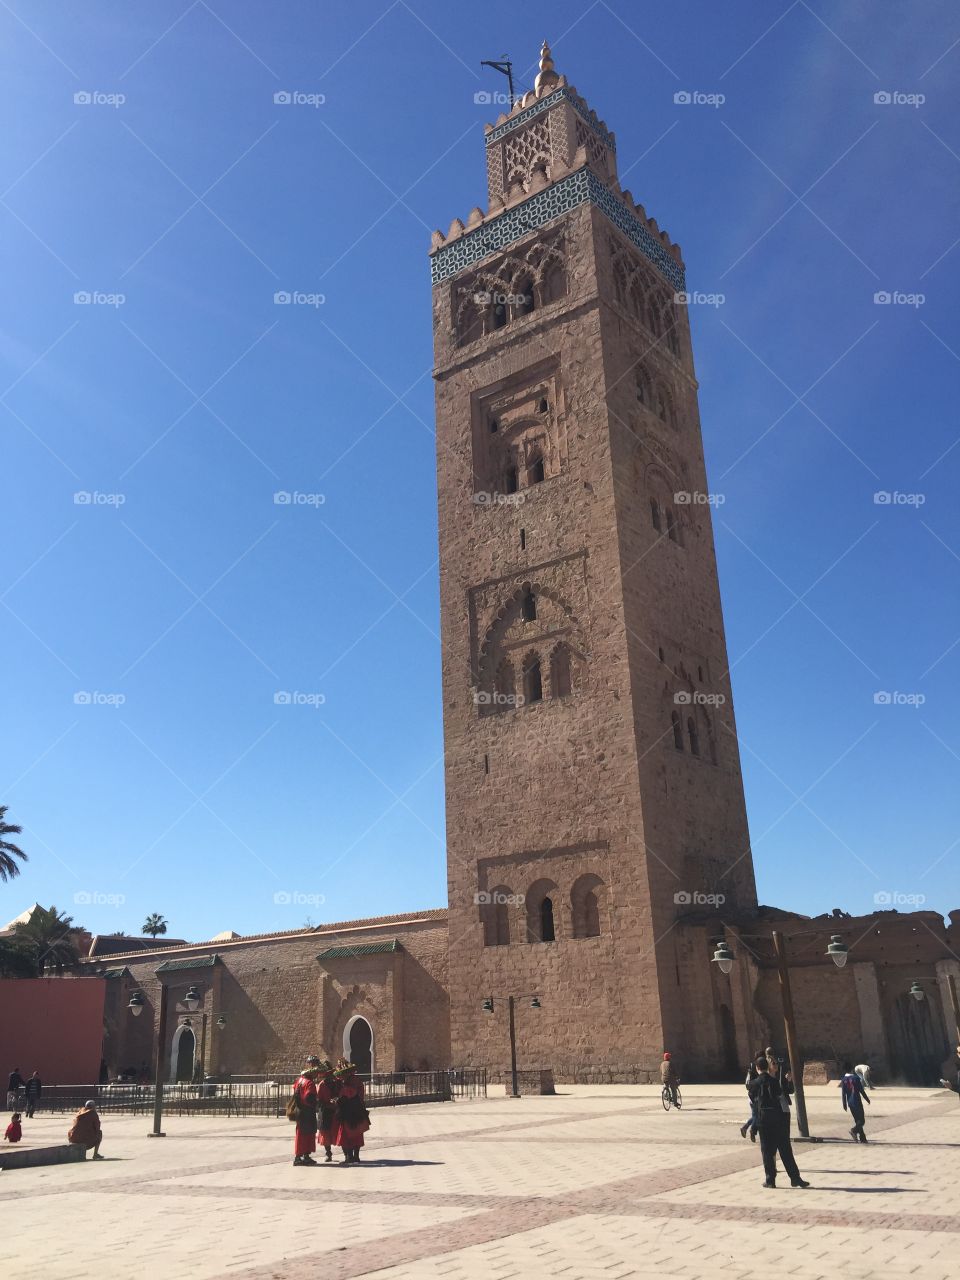 Largest mosque in Marrakech 